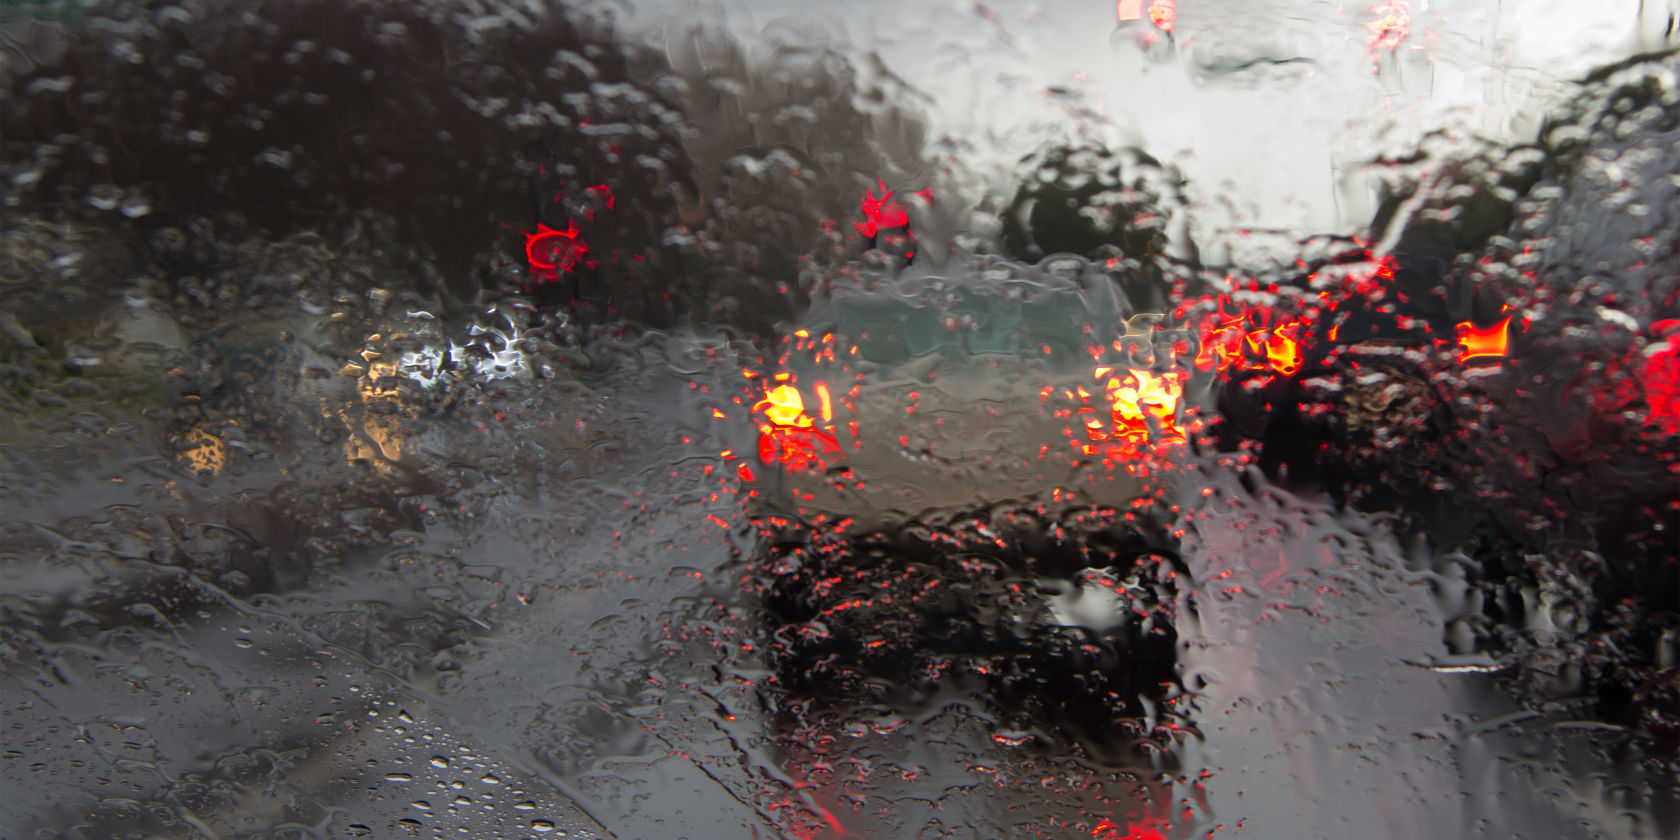 Aussie drivers struck by ‘storm smugness’ on wet roads